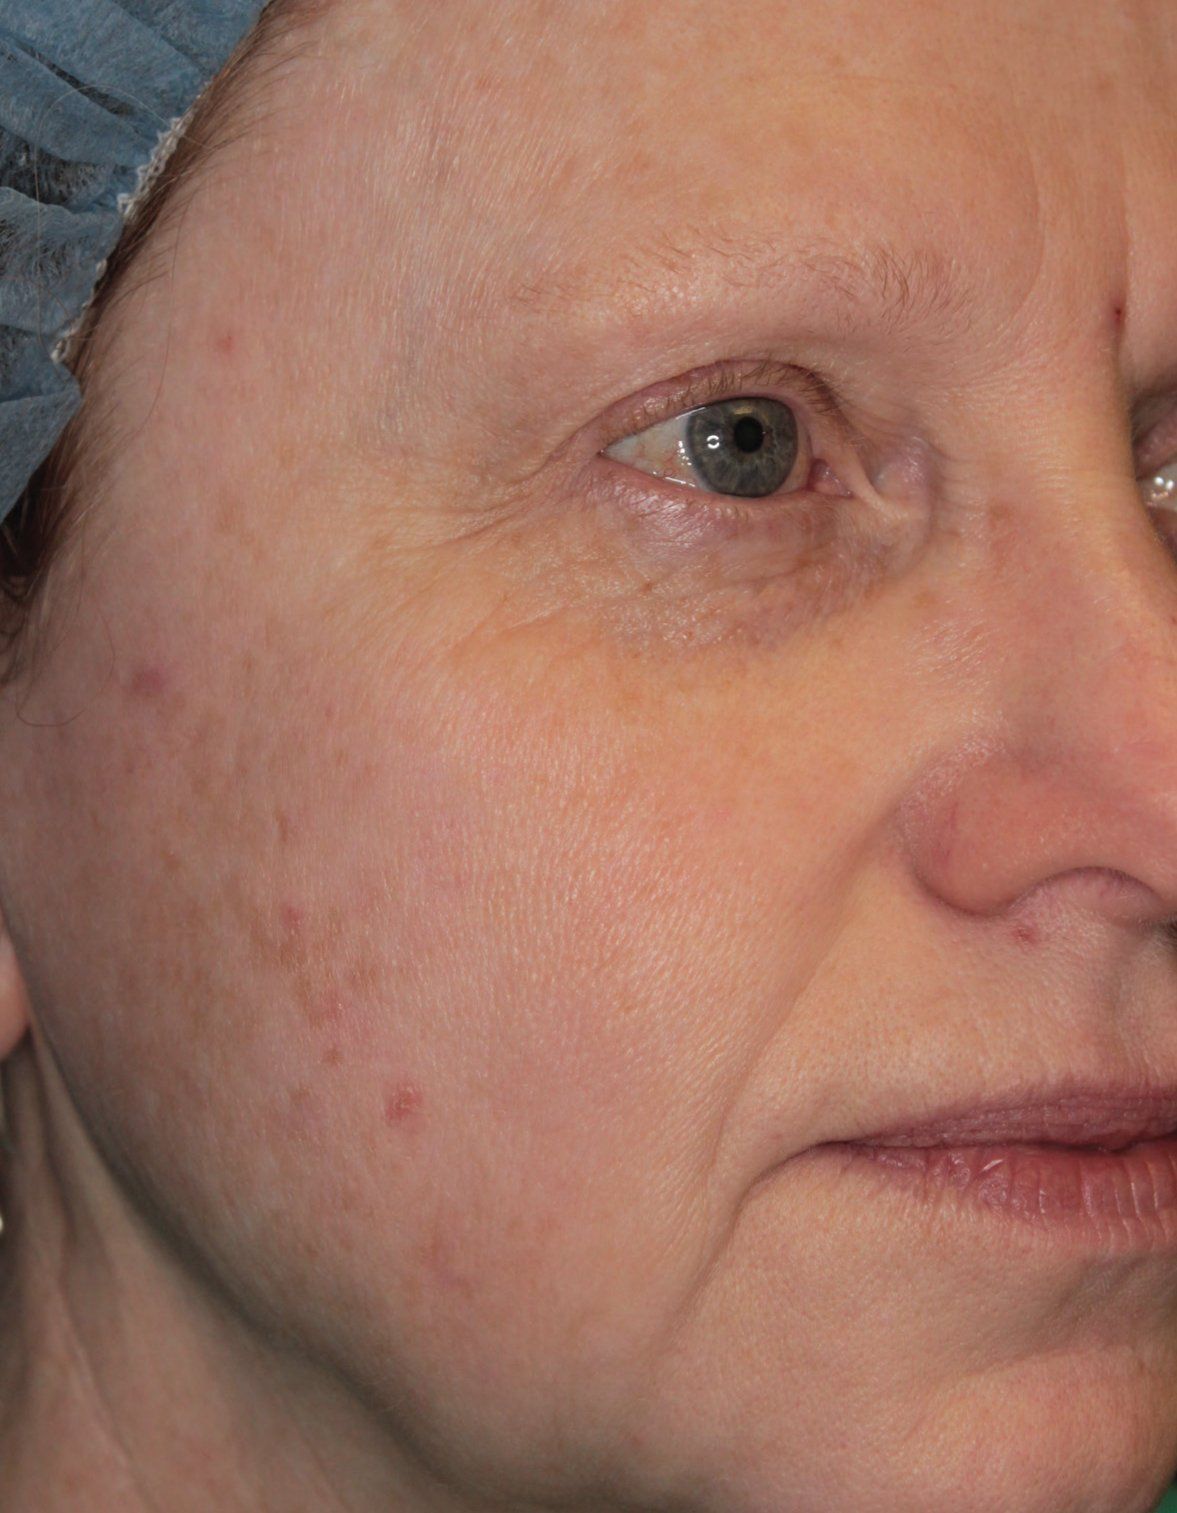 BBL Before Photo - A close up of a woman 's face with much less acne and improved texture